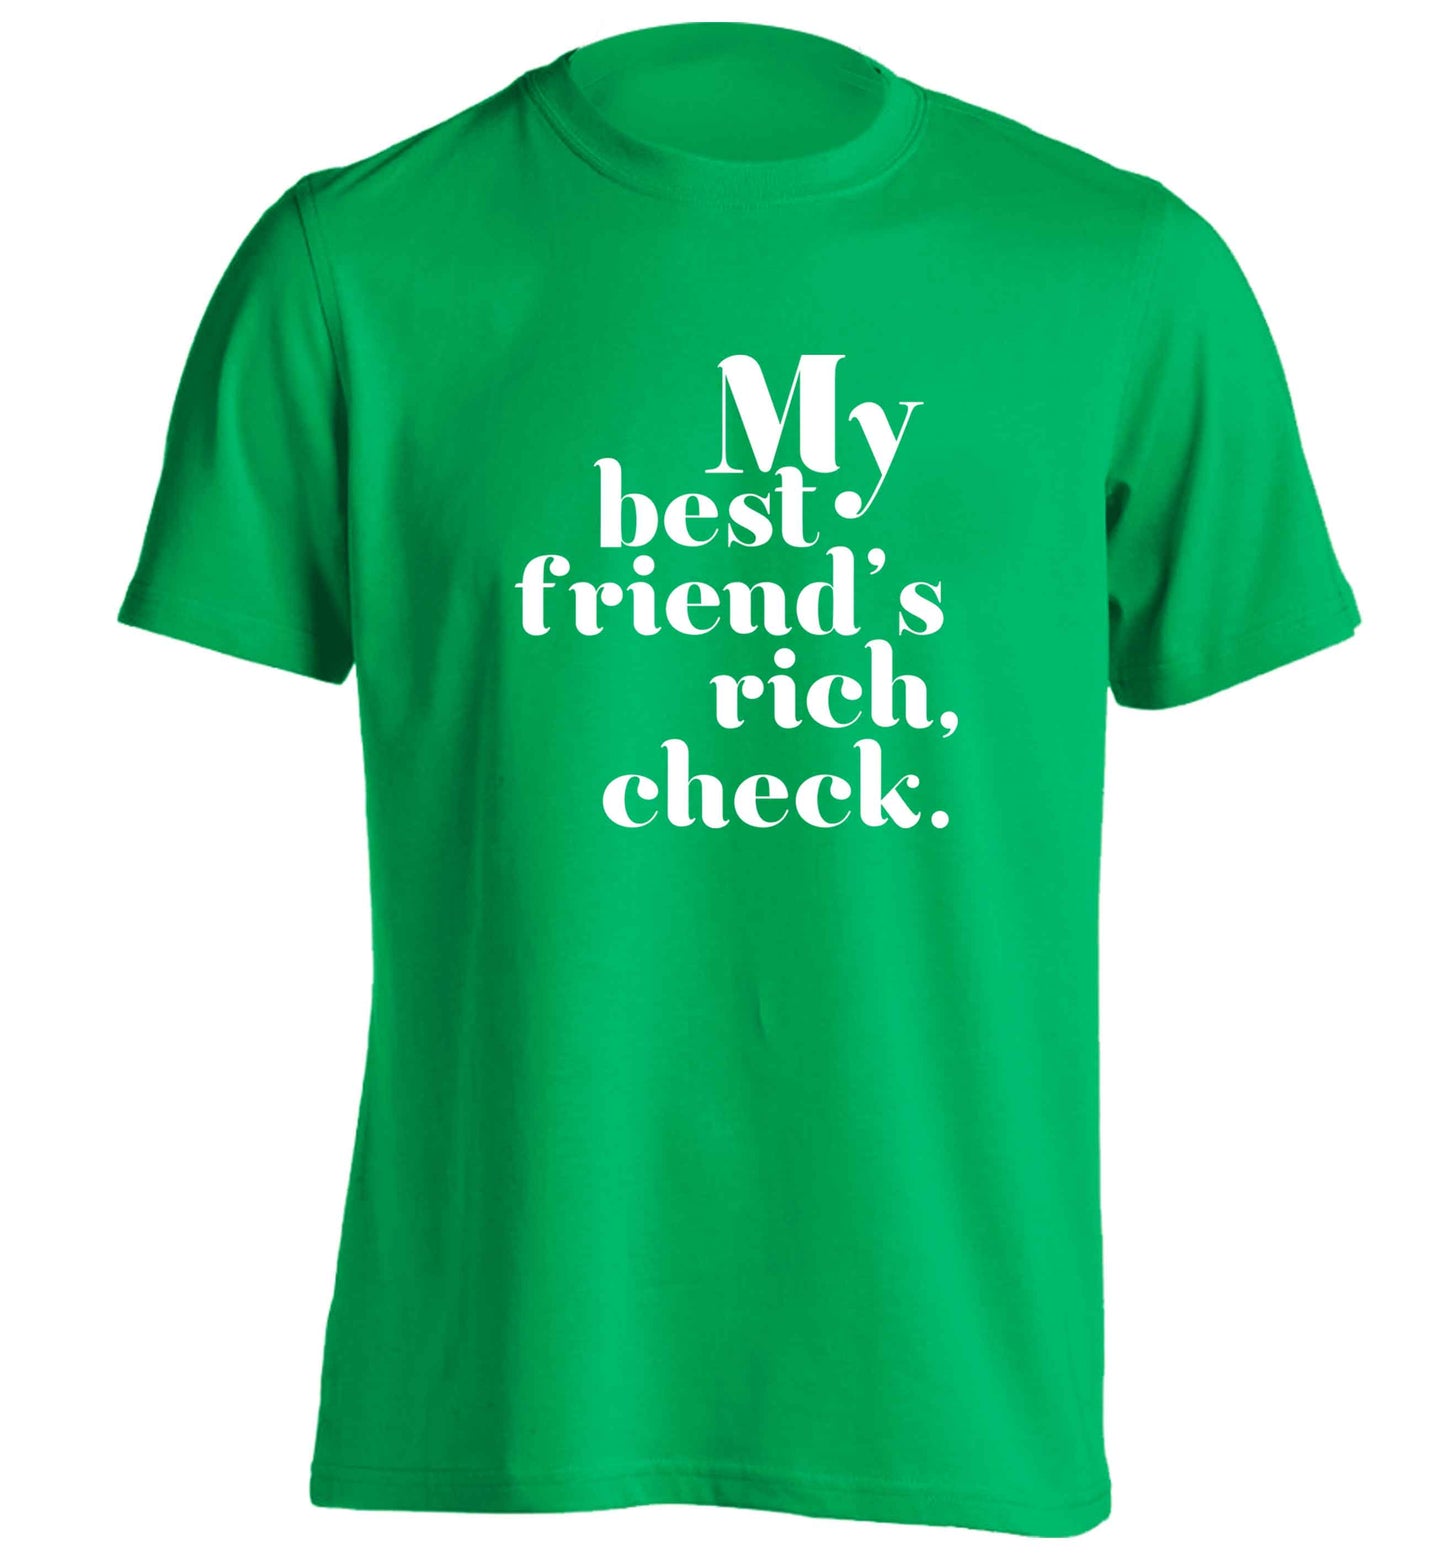 Got a rich best friend? Why not ask them to get you this, just let us  know and we'll tripple the price ;)  adults unisex green Tshirt 2XL